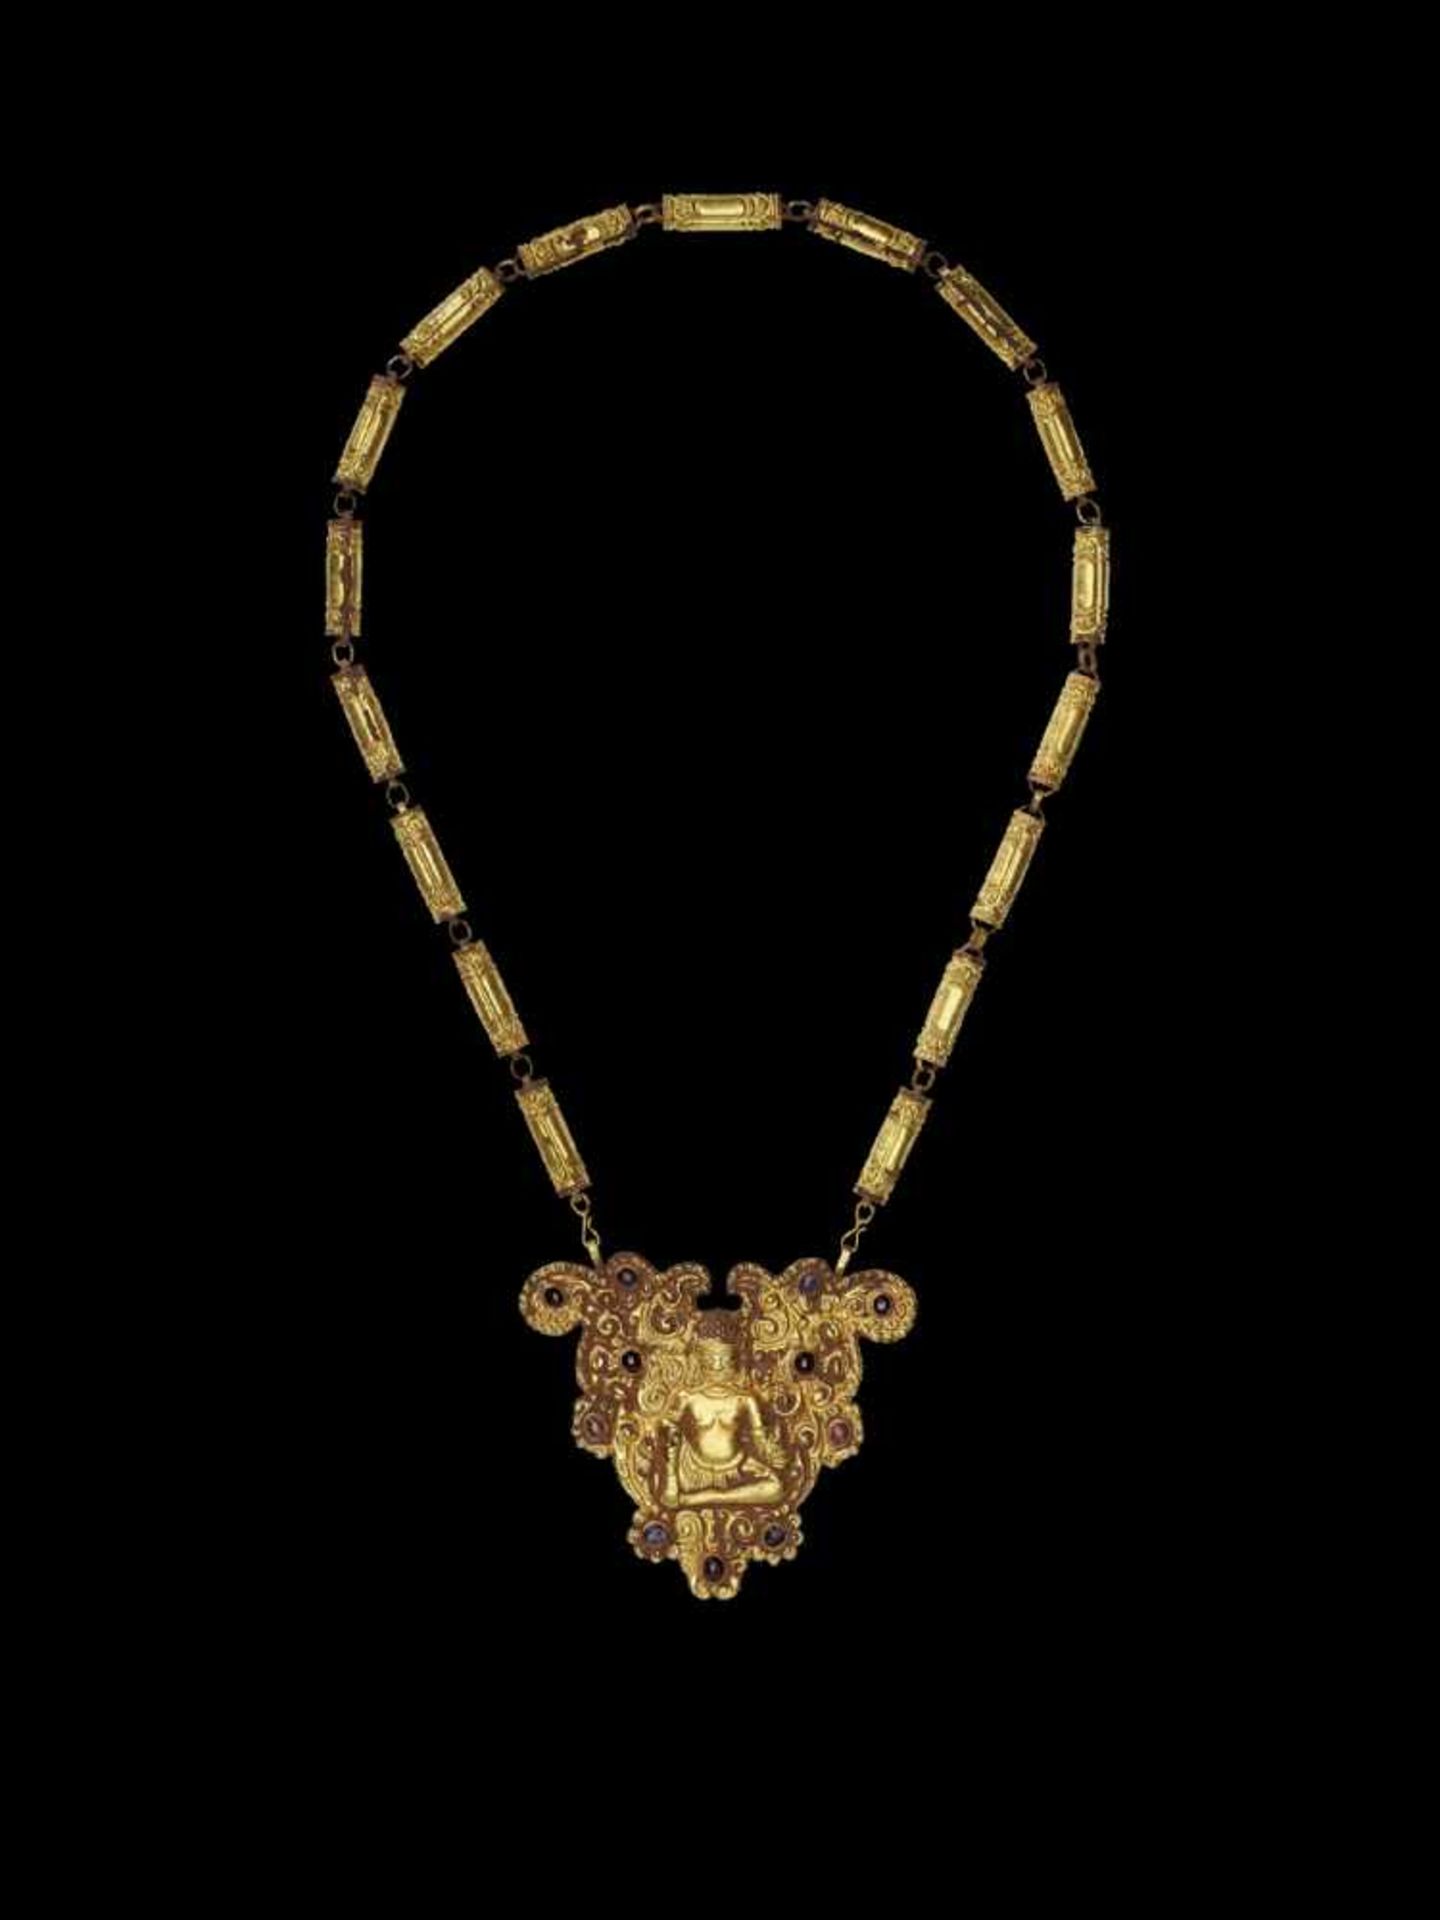 A CHAM REPOUSSÉ GOLD NECKLACE WITH A PECTORAL DEPICTING A SEATED HINDU DEITY Central or southern